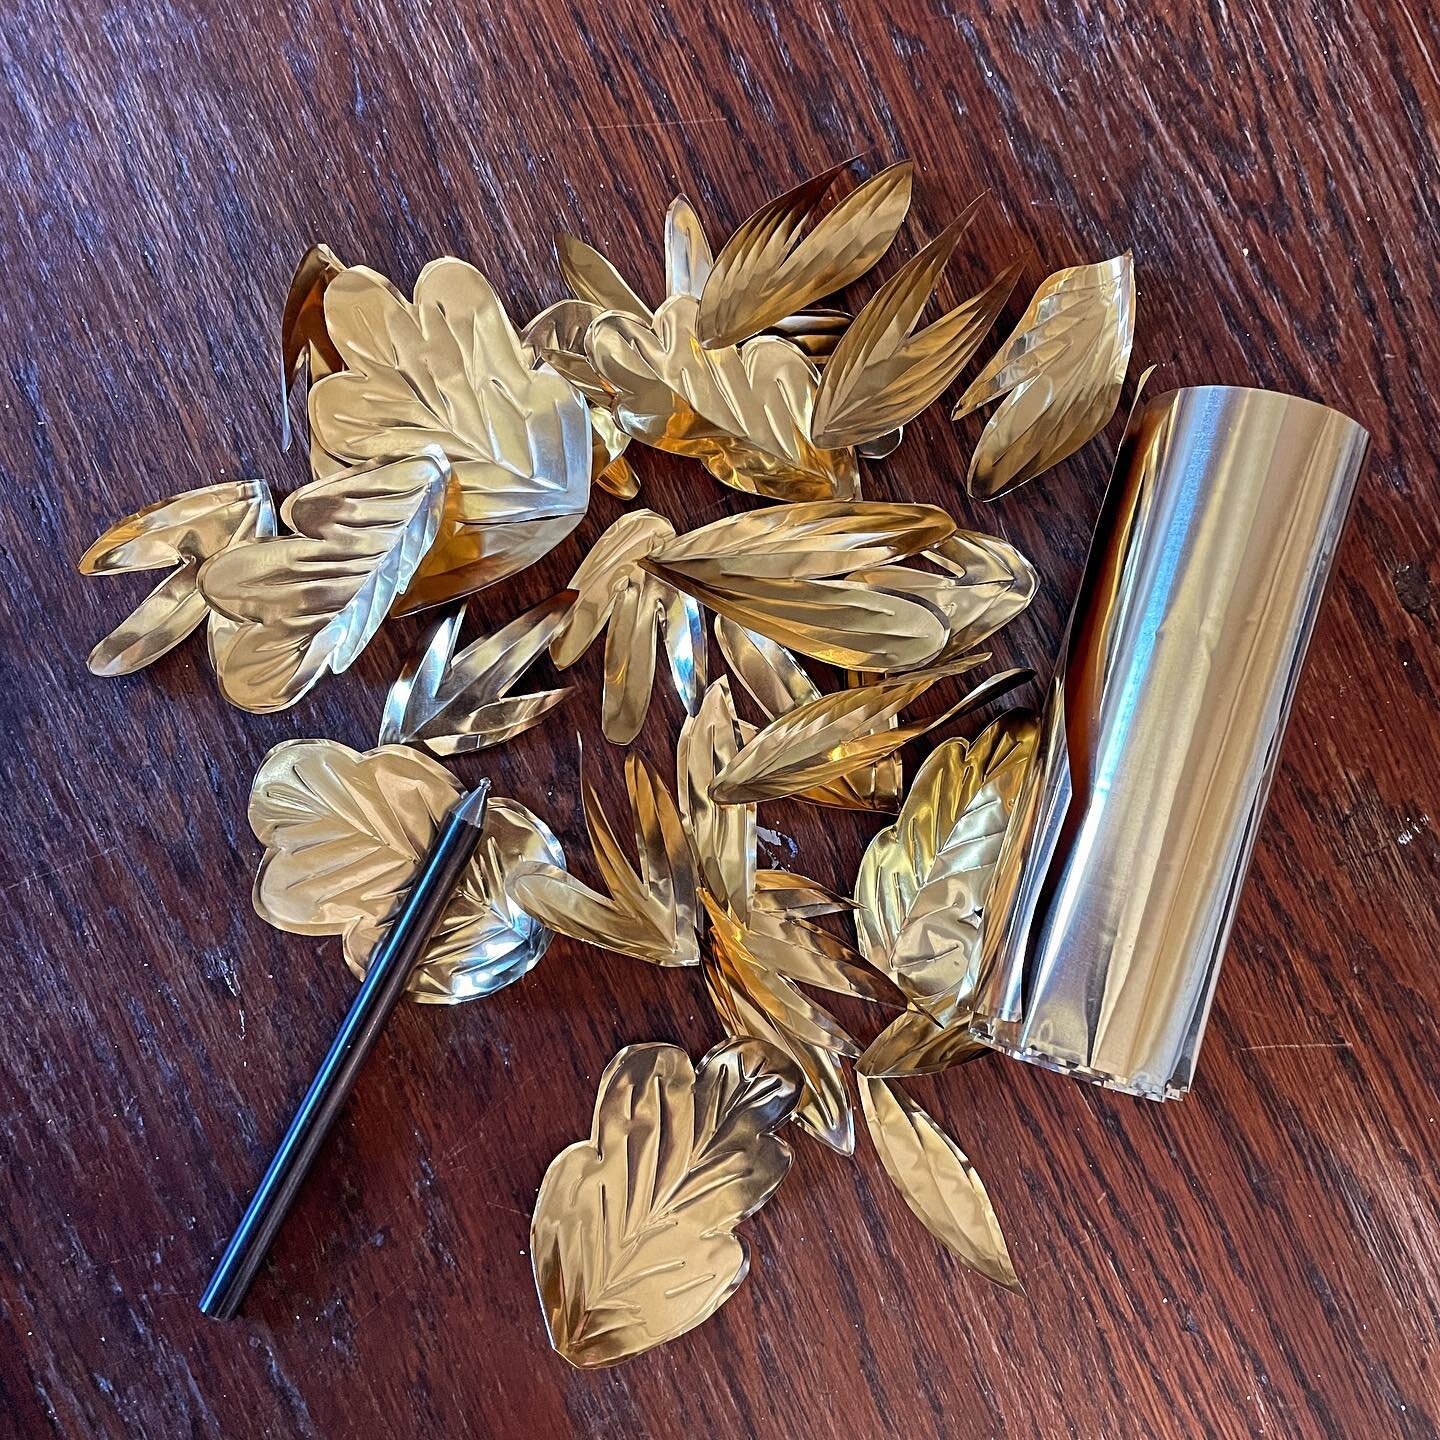 Lots of brass leaves on my desk today. Think I&rsquo;ll add these to my wreath or garland later.